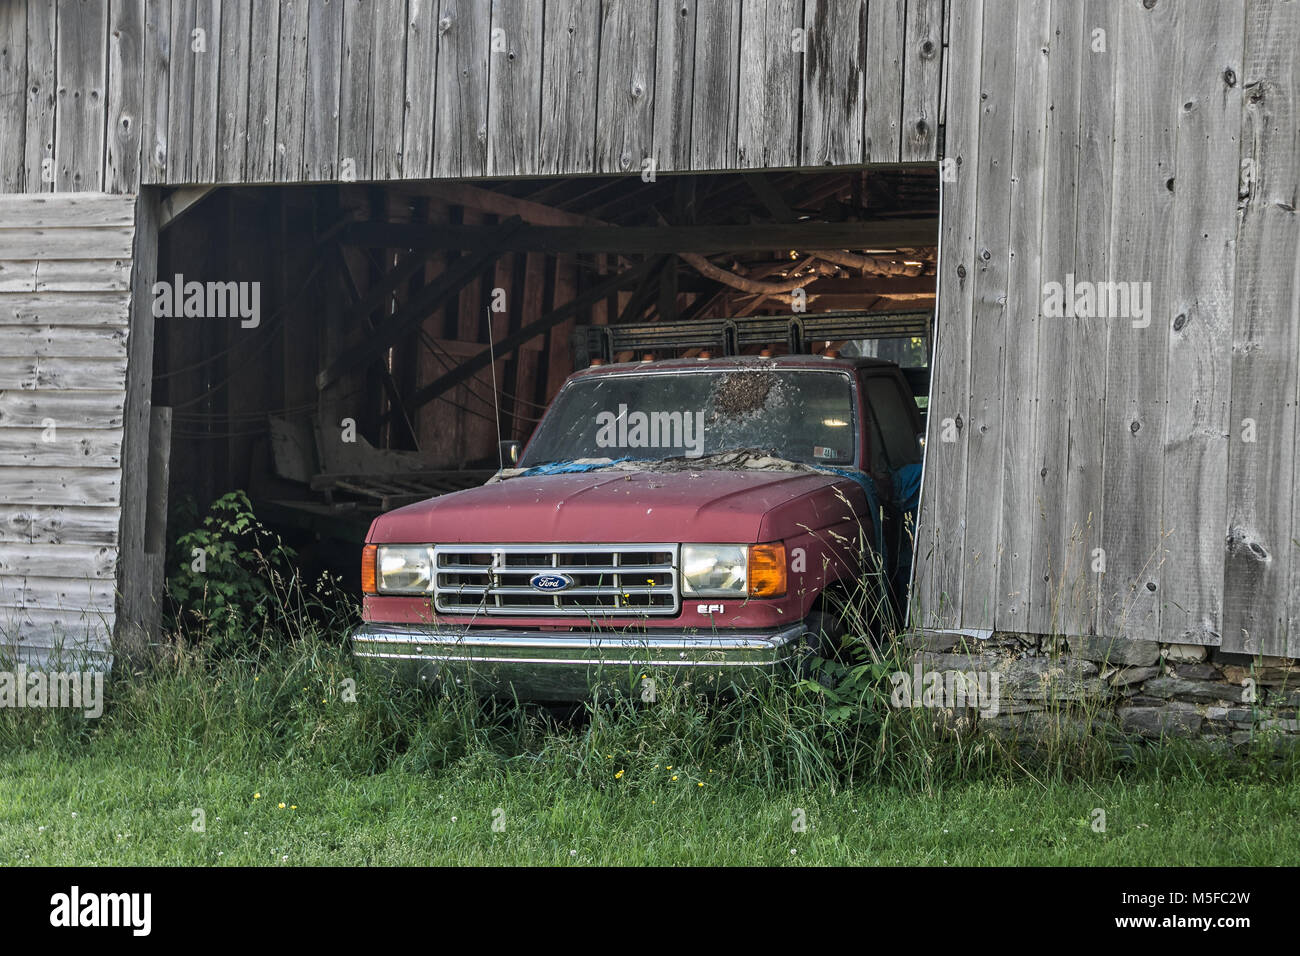 Old abandoned vehicle in a wooden barn. Stock Photo